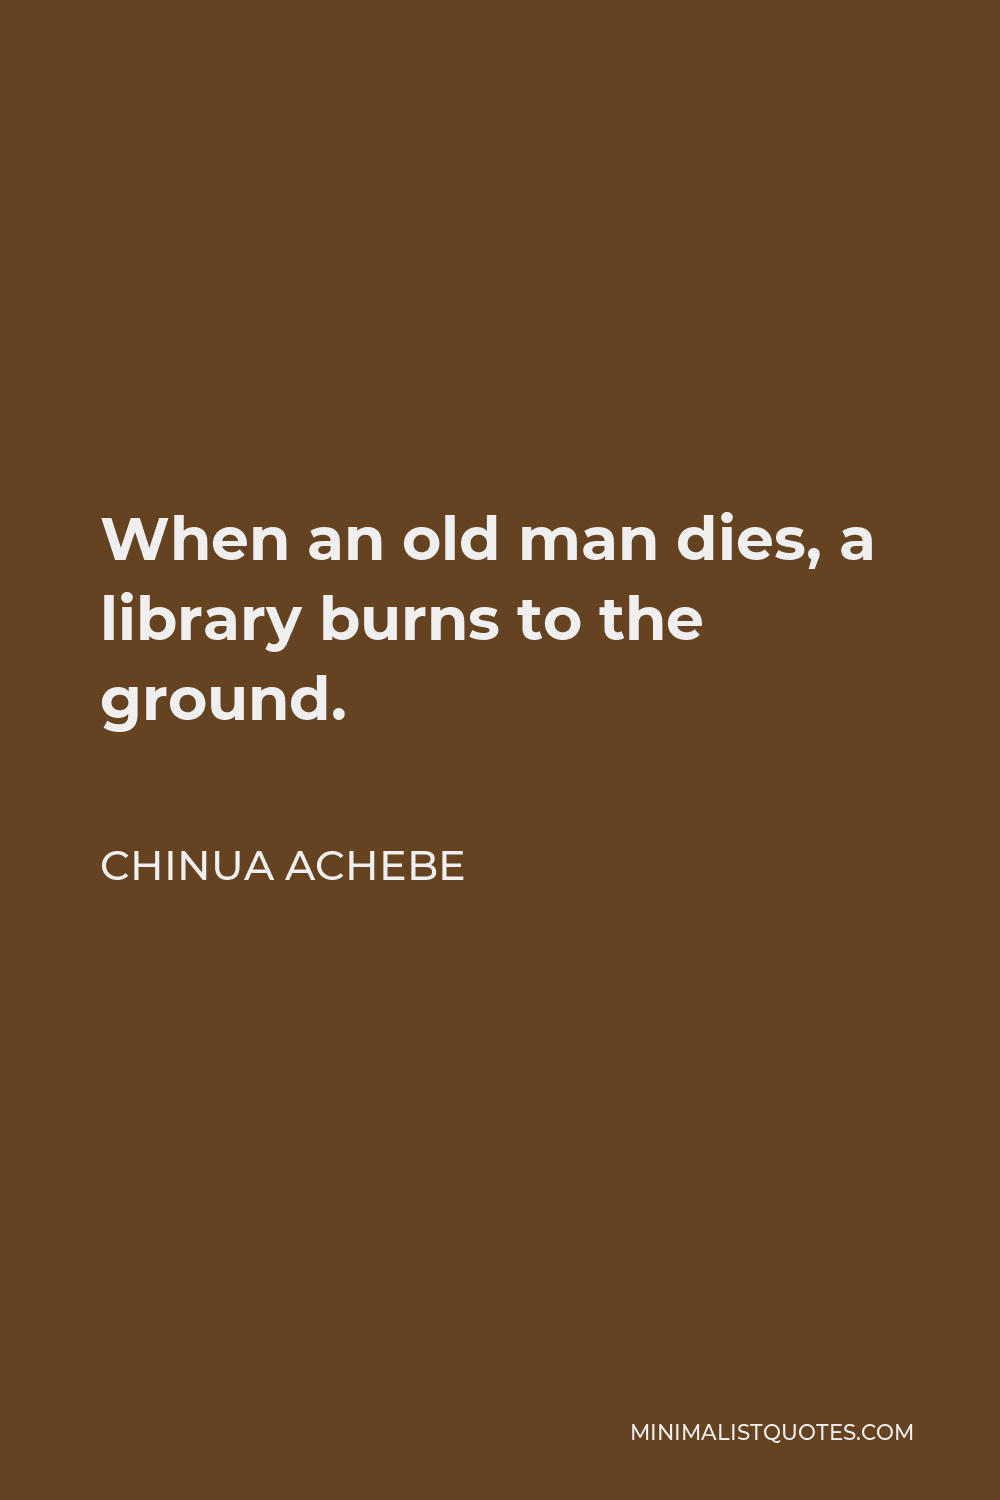 Chinua Achebe Quote - When an old man dies, a library burns to the ground.